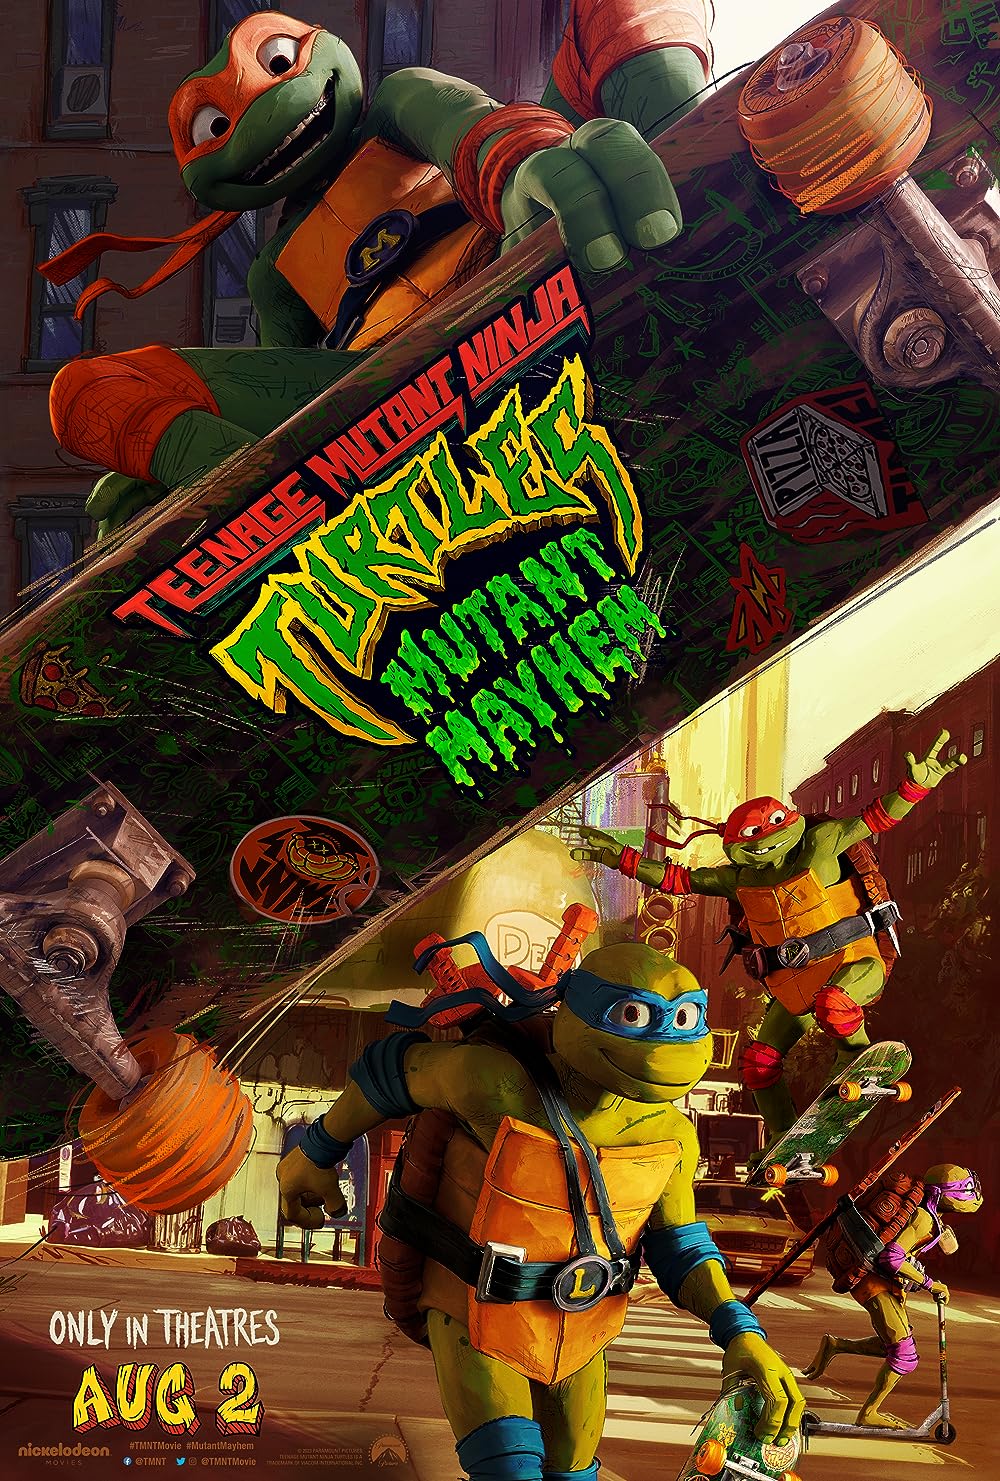 https://static.wikia.nocookie.net/tmnt/images/3/3a/TMNT_Mutant_Mayhem_theatrical_poster.jpg/revision/latest?cb=20231009174556